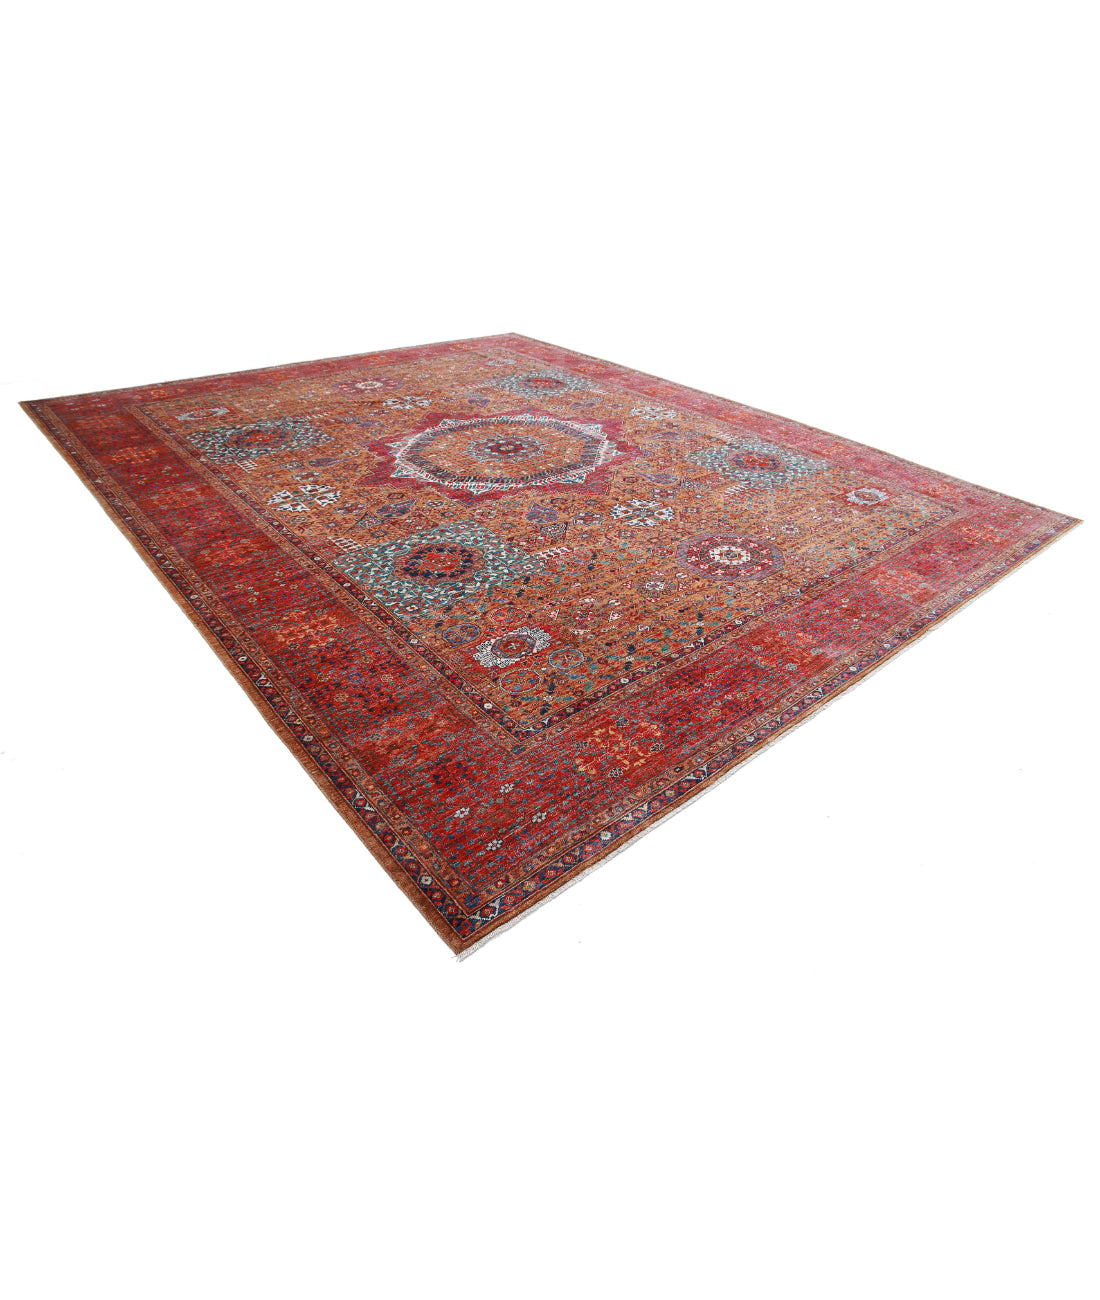 Hand Knotted Nomadic Caucasian Humna Wool Rug - 13'3'' x 16'2'' 13'3'' x 16'2'' (398 X 485) / Brown / Red